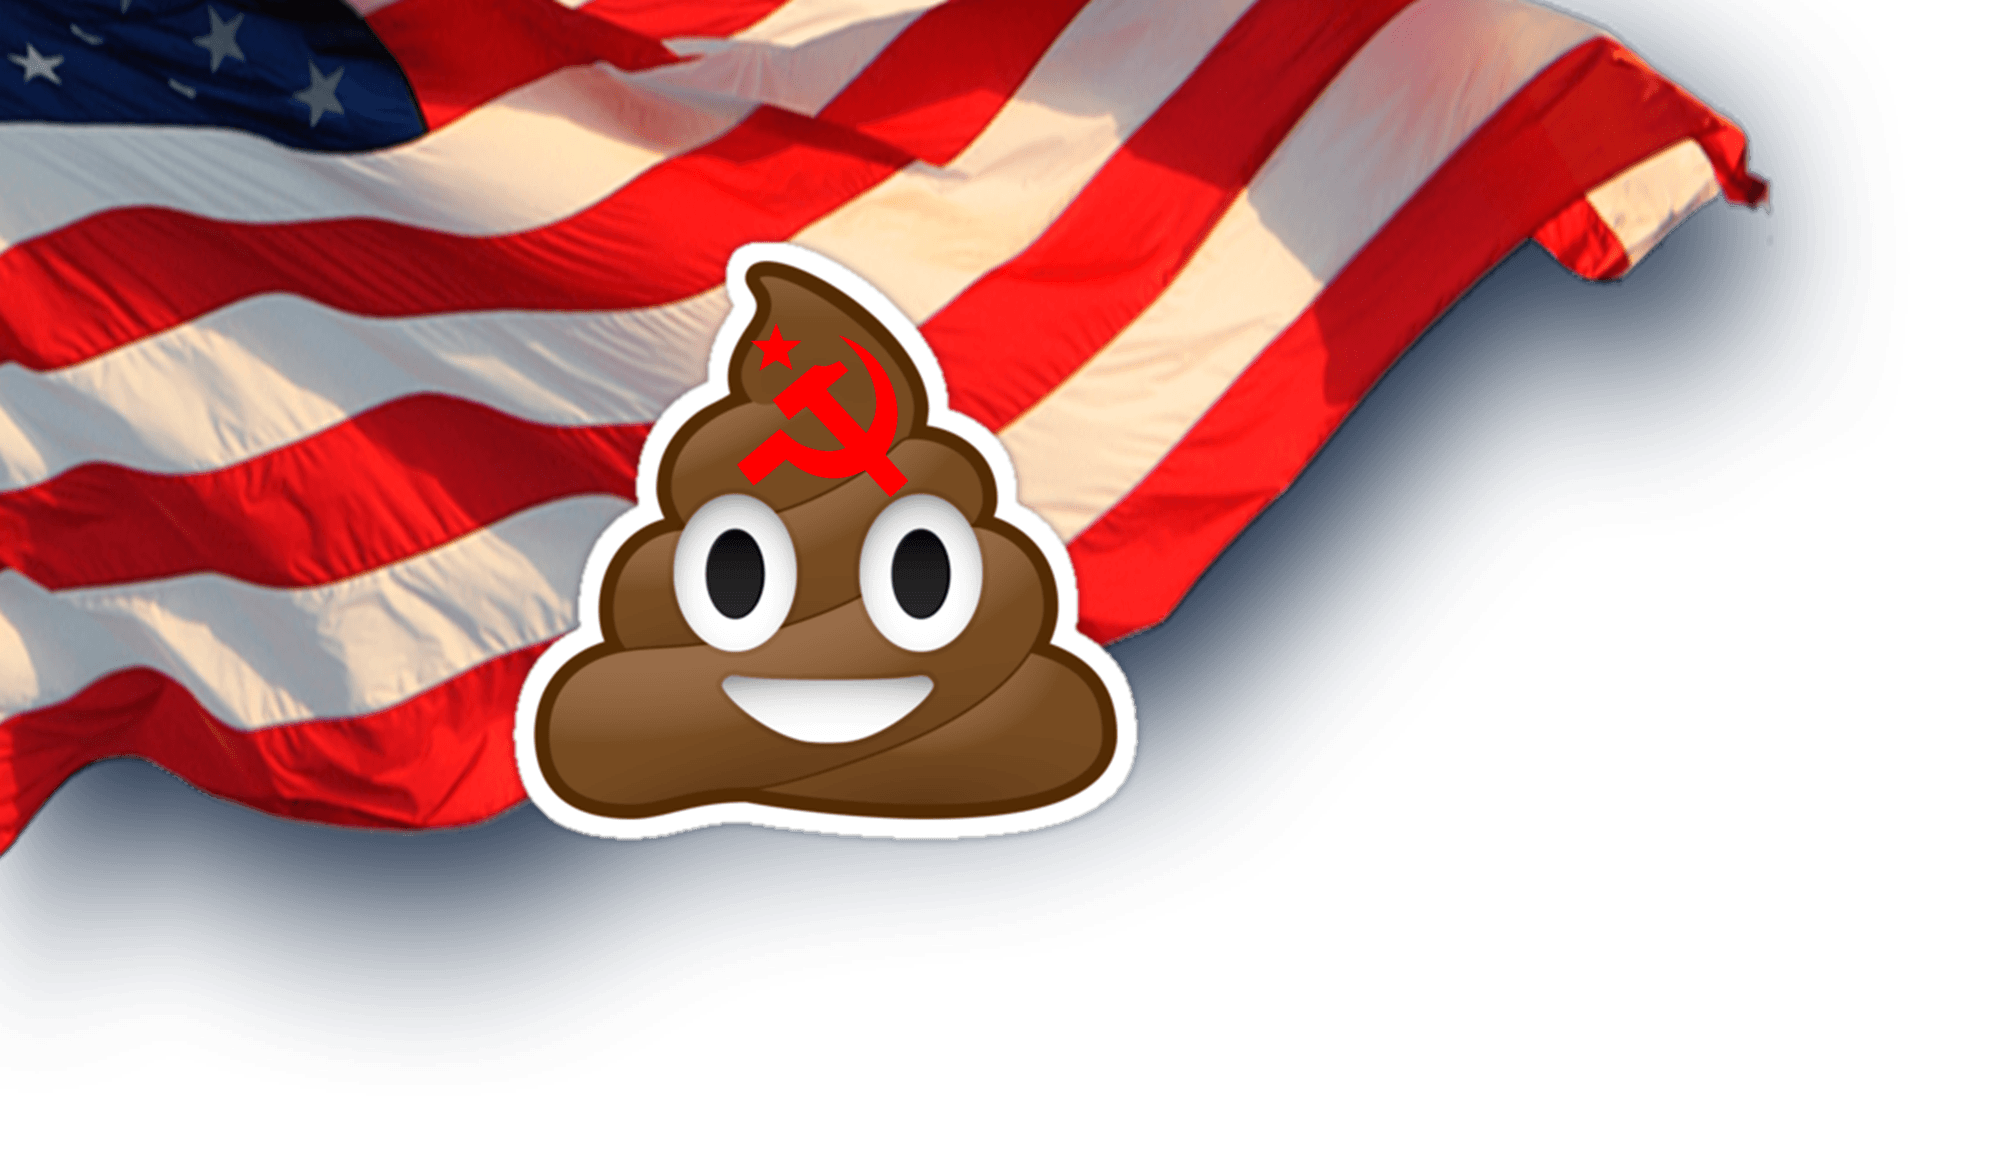 Socialism, the Turd of the World